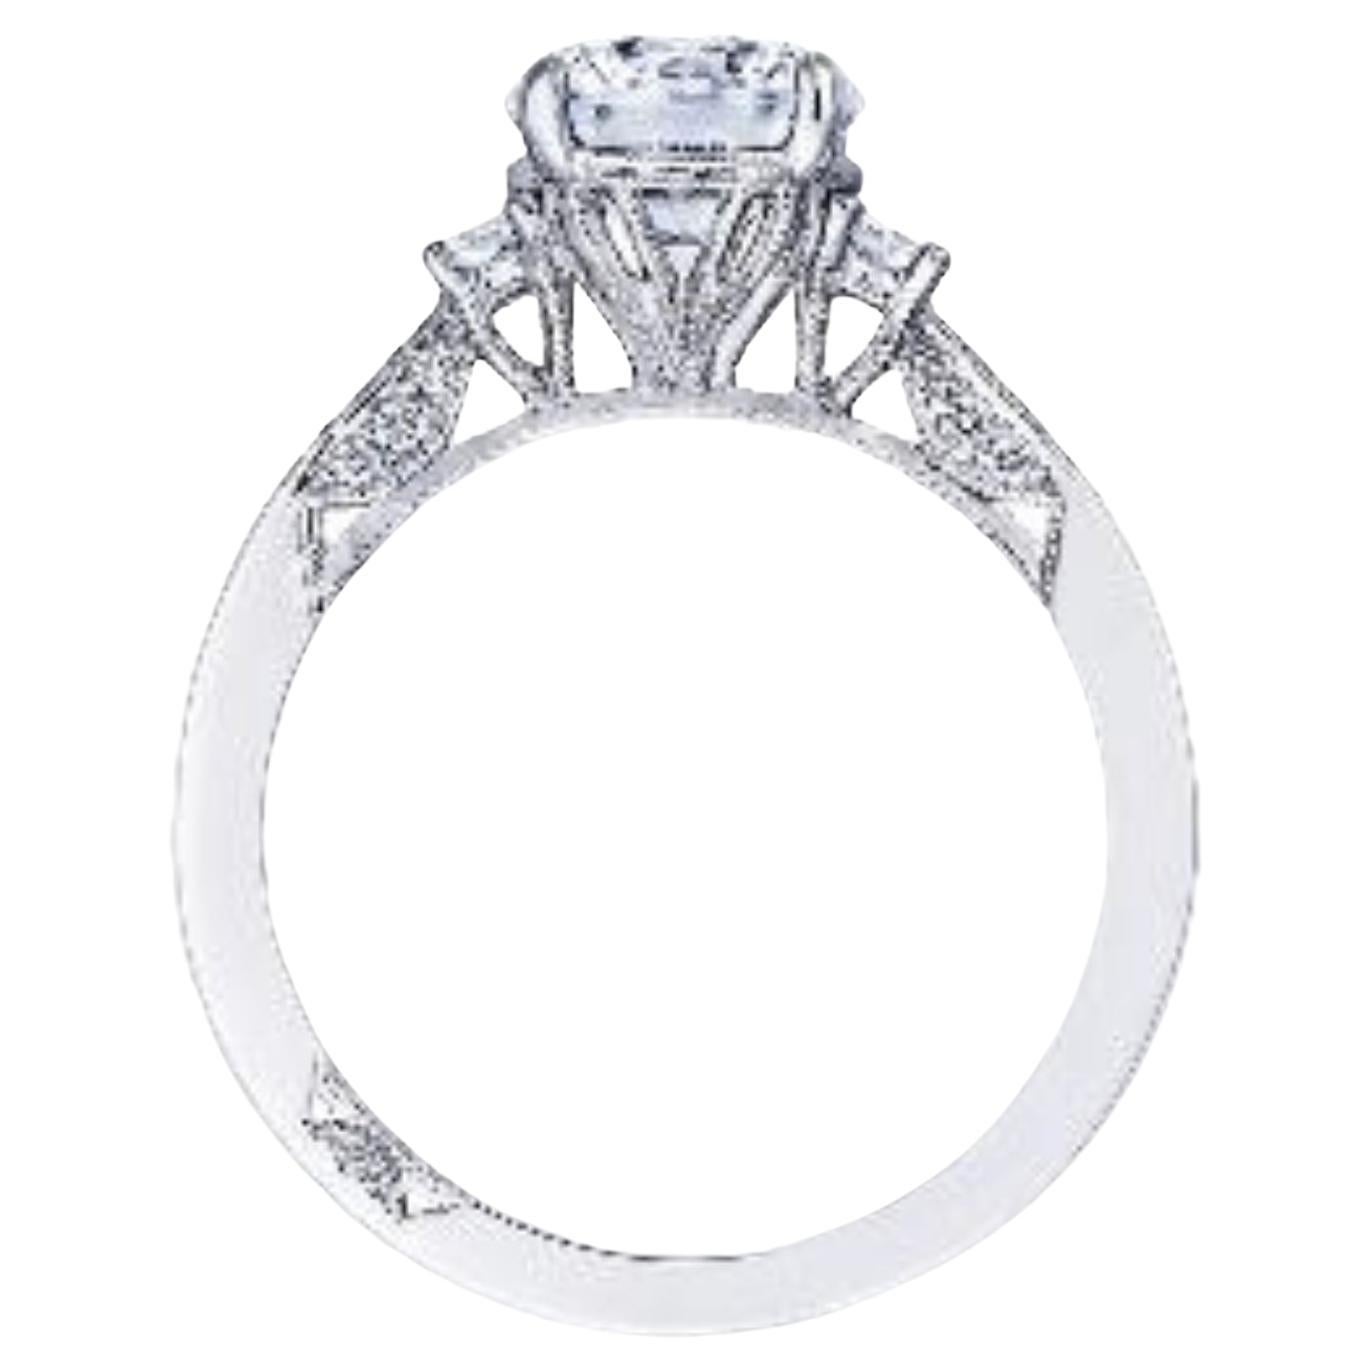 One 18-karat white gold Tacori diamond semi-mounting. This elegant picture-frame prong outlines your round center, which is further brought to life by two high-intensity cadillac side stones on a high polished band with pave diamond detailing. The